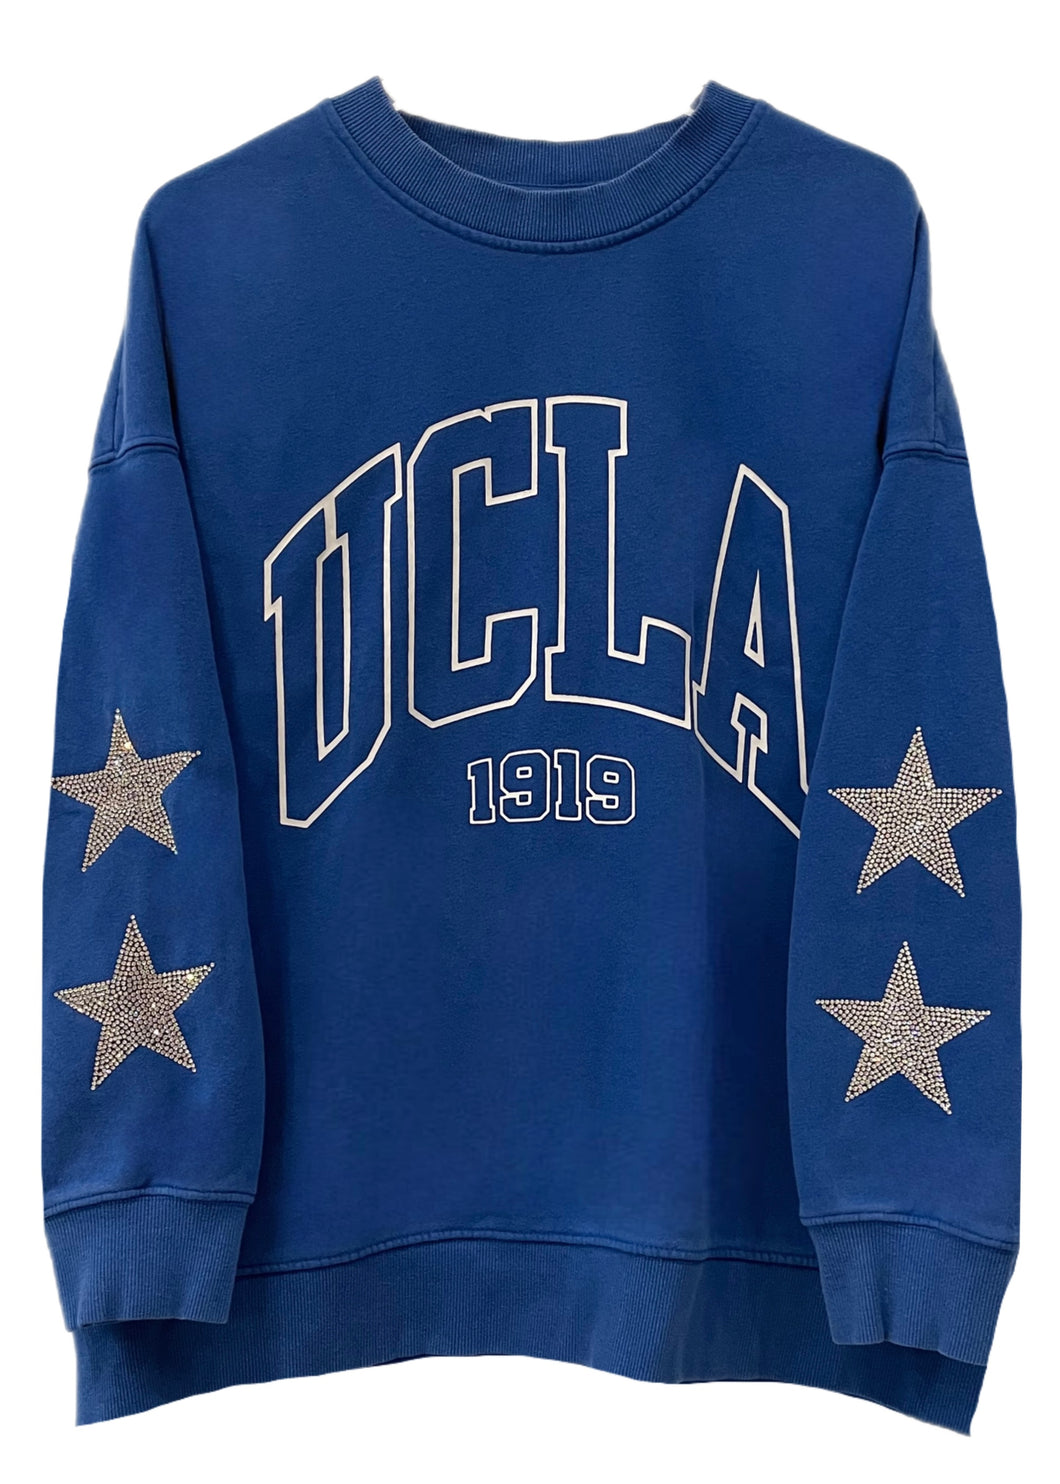 University of California Los Angeles, One of a KIND Vintage Bruins UCLA with Crystals Star Design